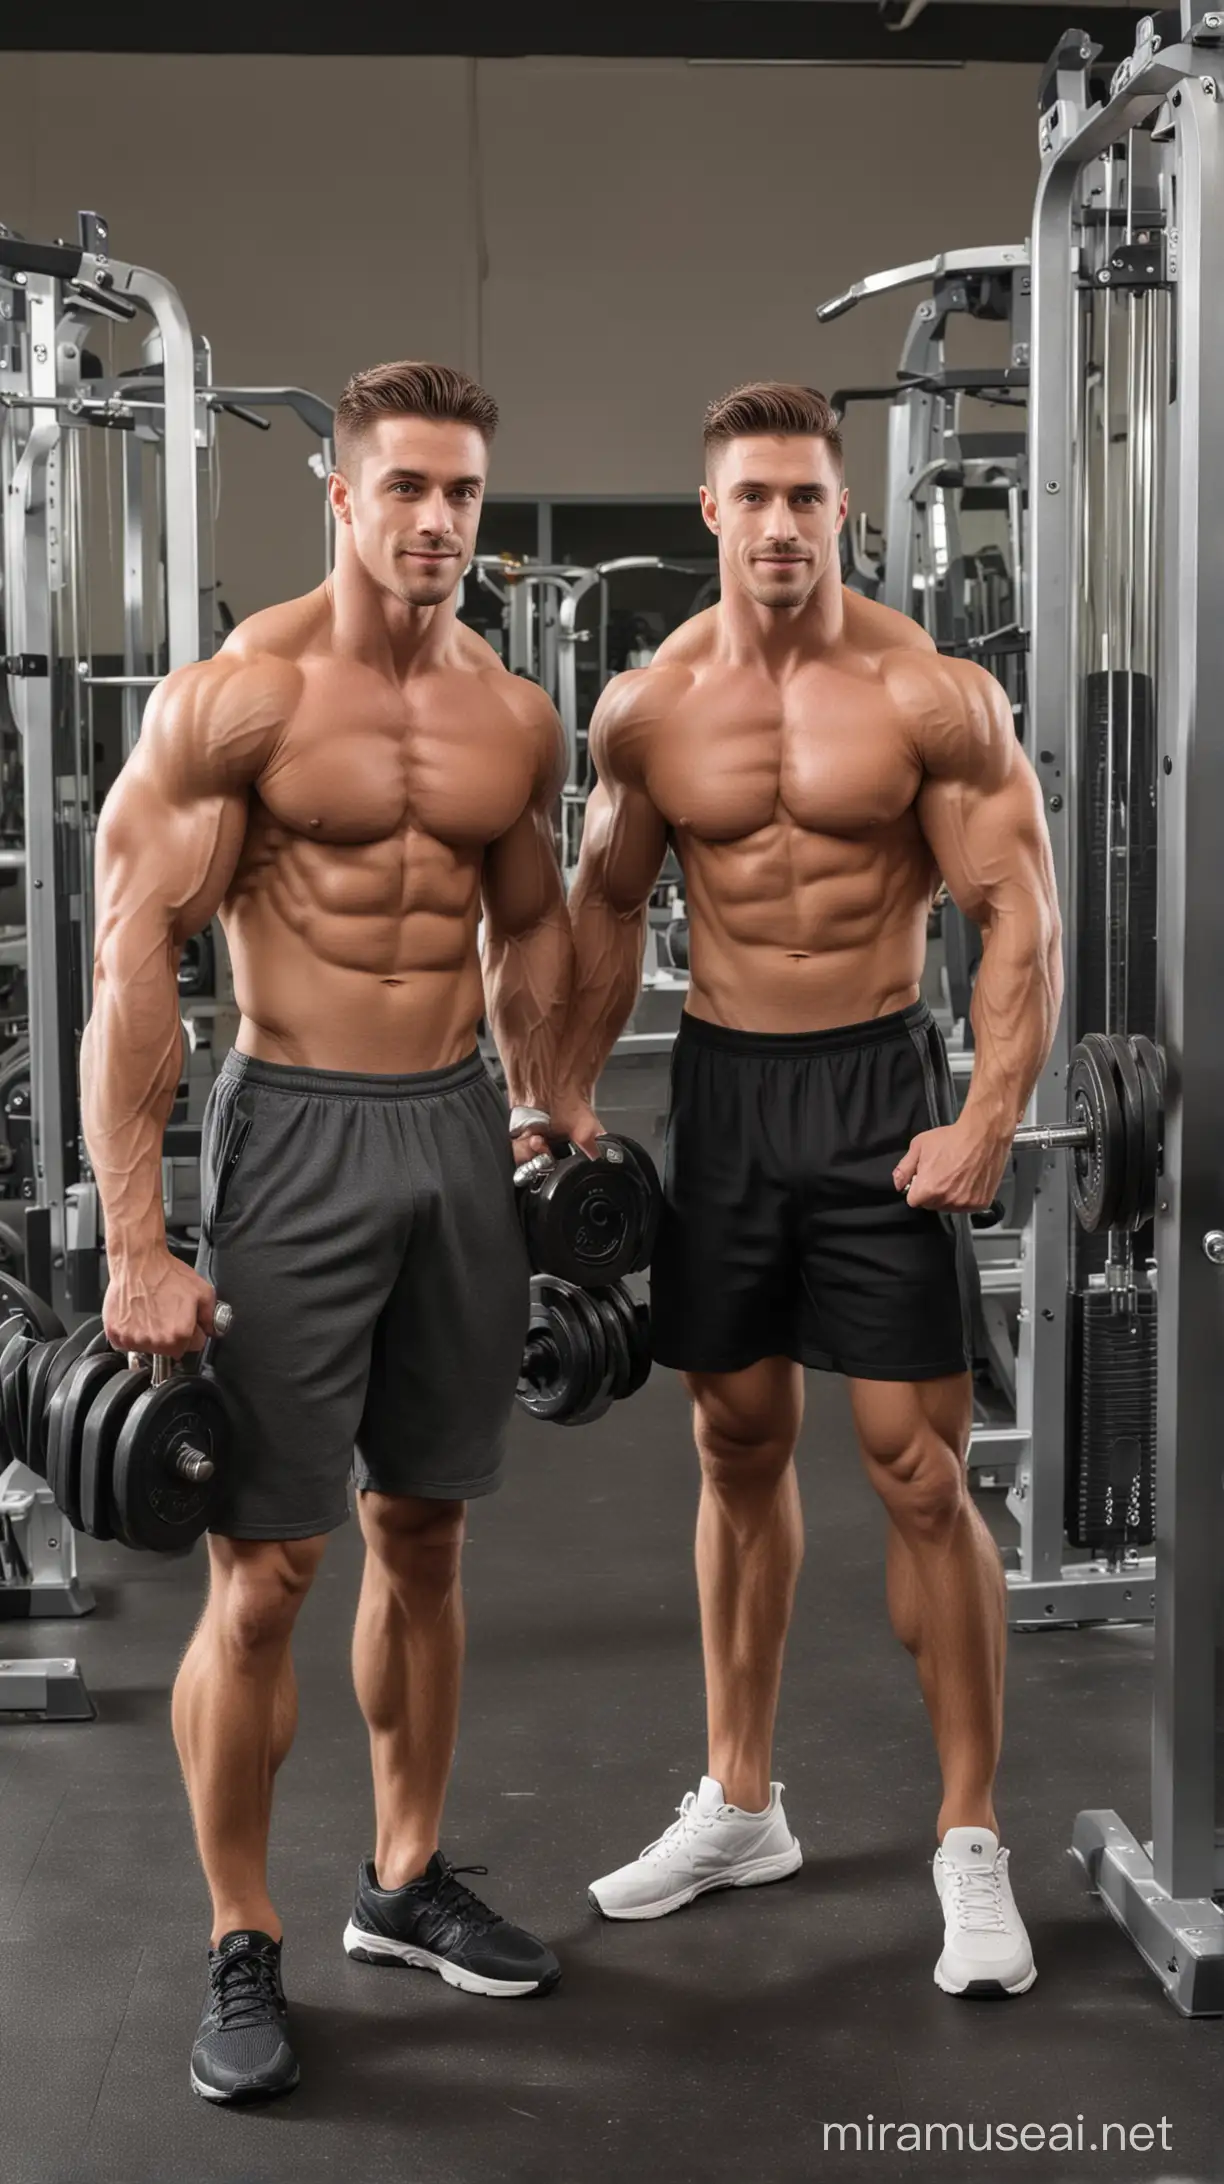 a handsome bodybuilder working out at a gym with his buddy